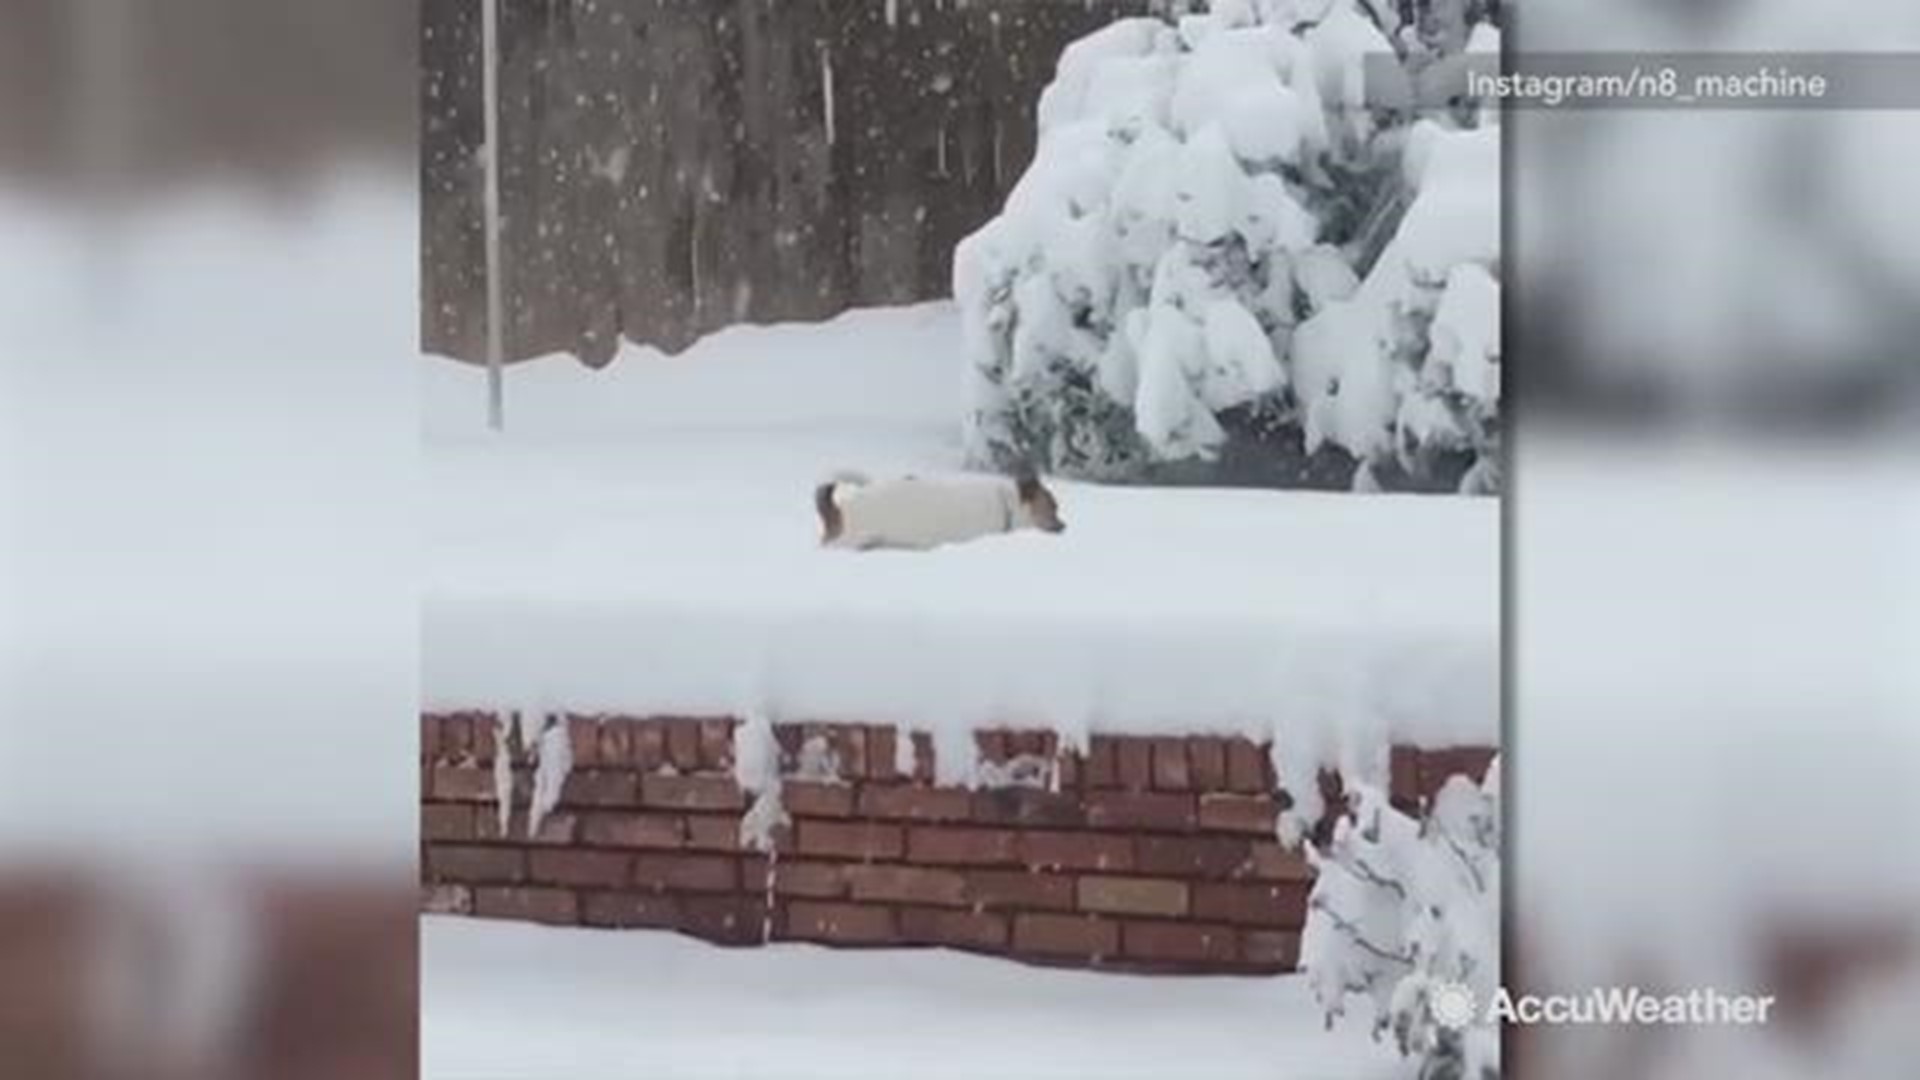 After Lubbock, Texas with hit with several inches of snow, this pup found a way to enjoy himself.